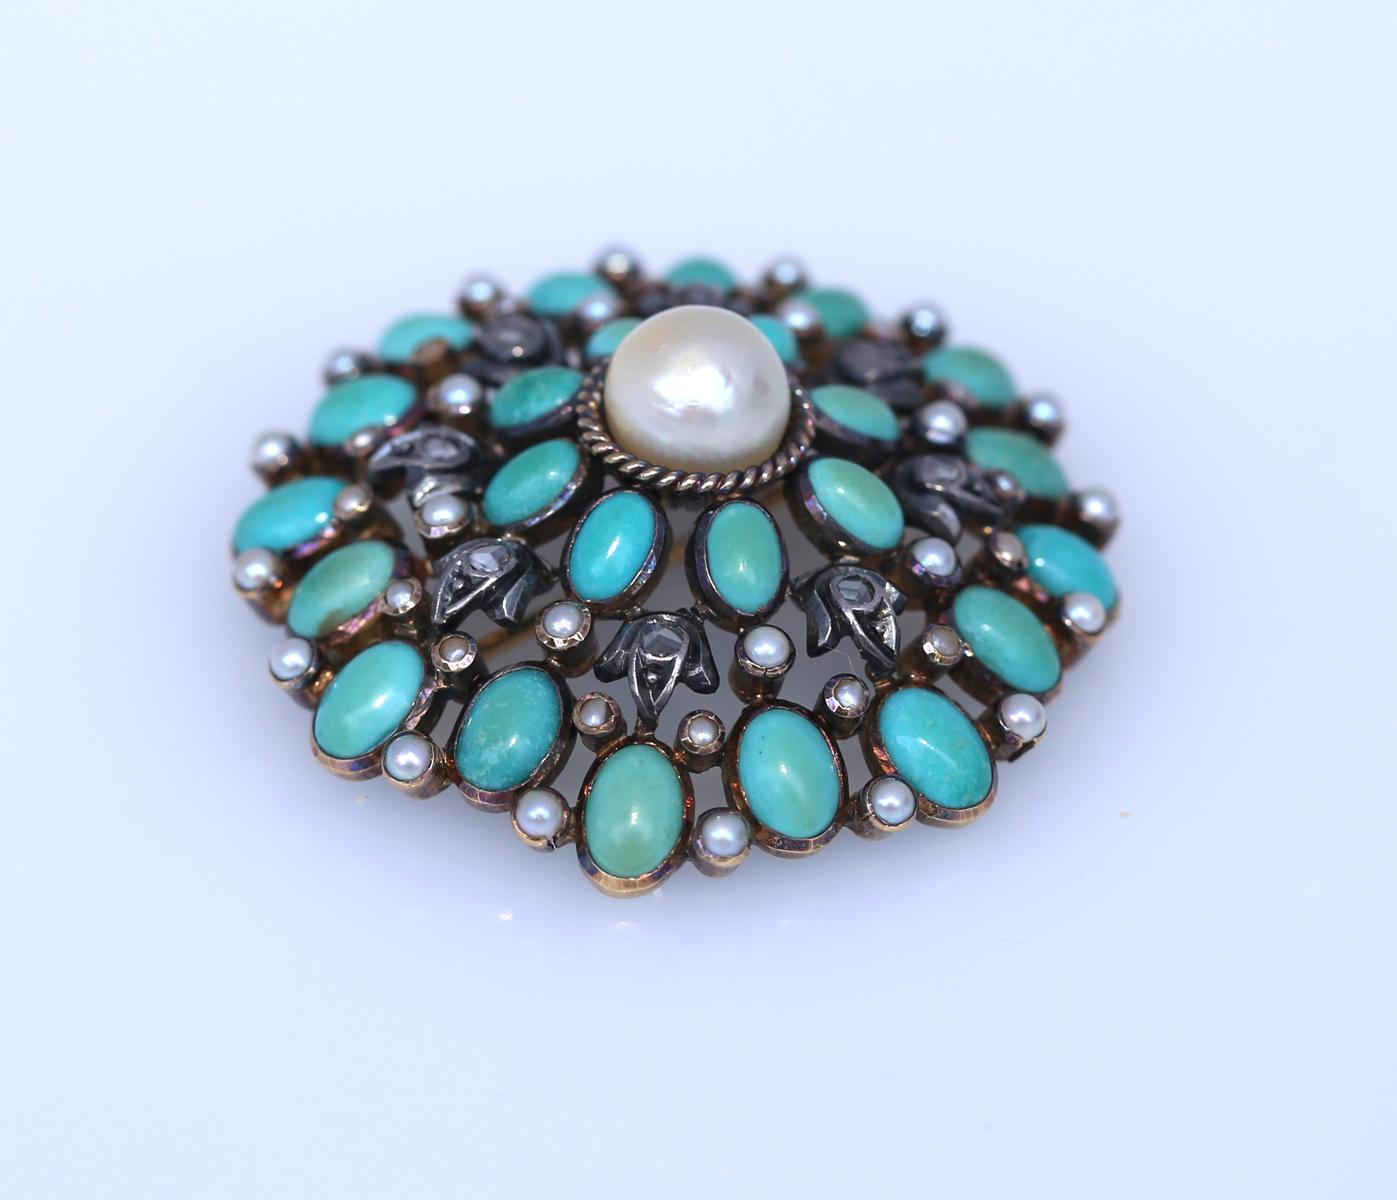 Turquoise with Old-cut Diamonds and Pearls Brooch. Cast in Gold and Silver. A massive colourful and stylish brooch from the great land of Portugal.

Once it was common to communicate a message via pin or brooch. Nowadays this art is lost, but we can